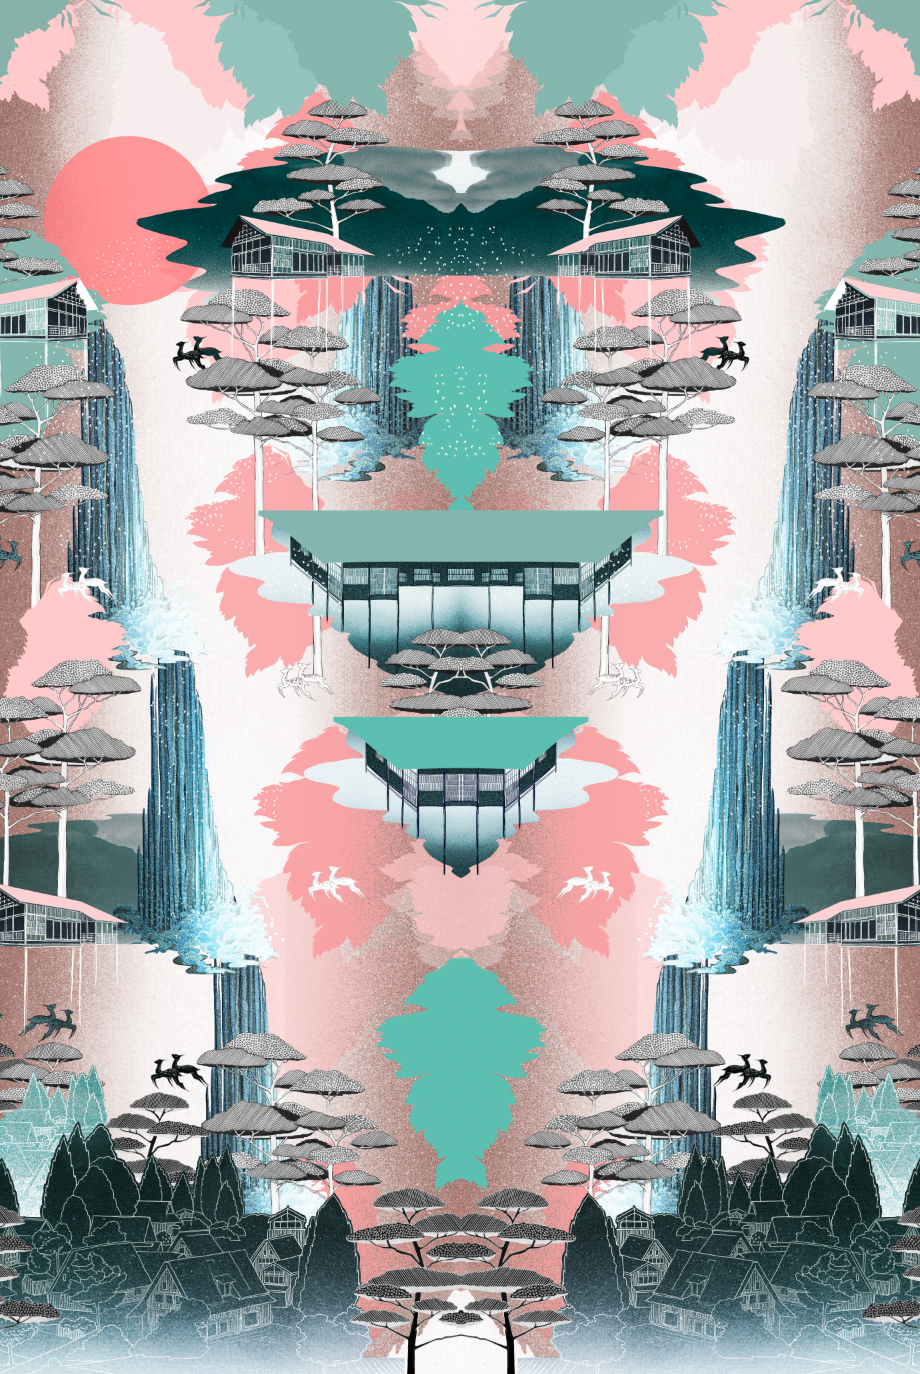 Full size Nara print design showing Japanese inspired landscape in green, coral and browns